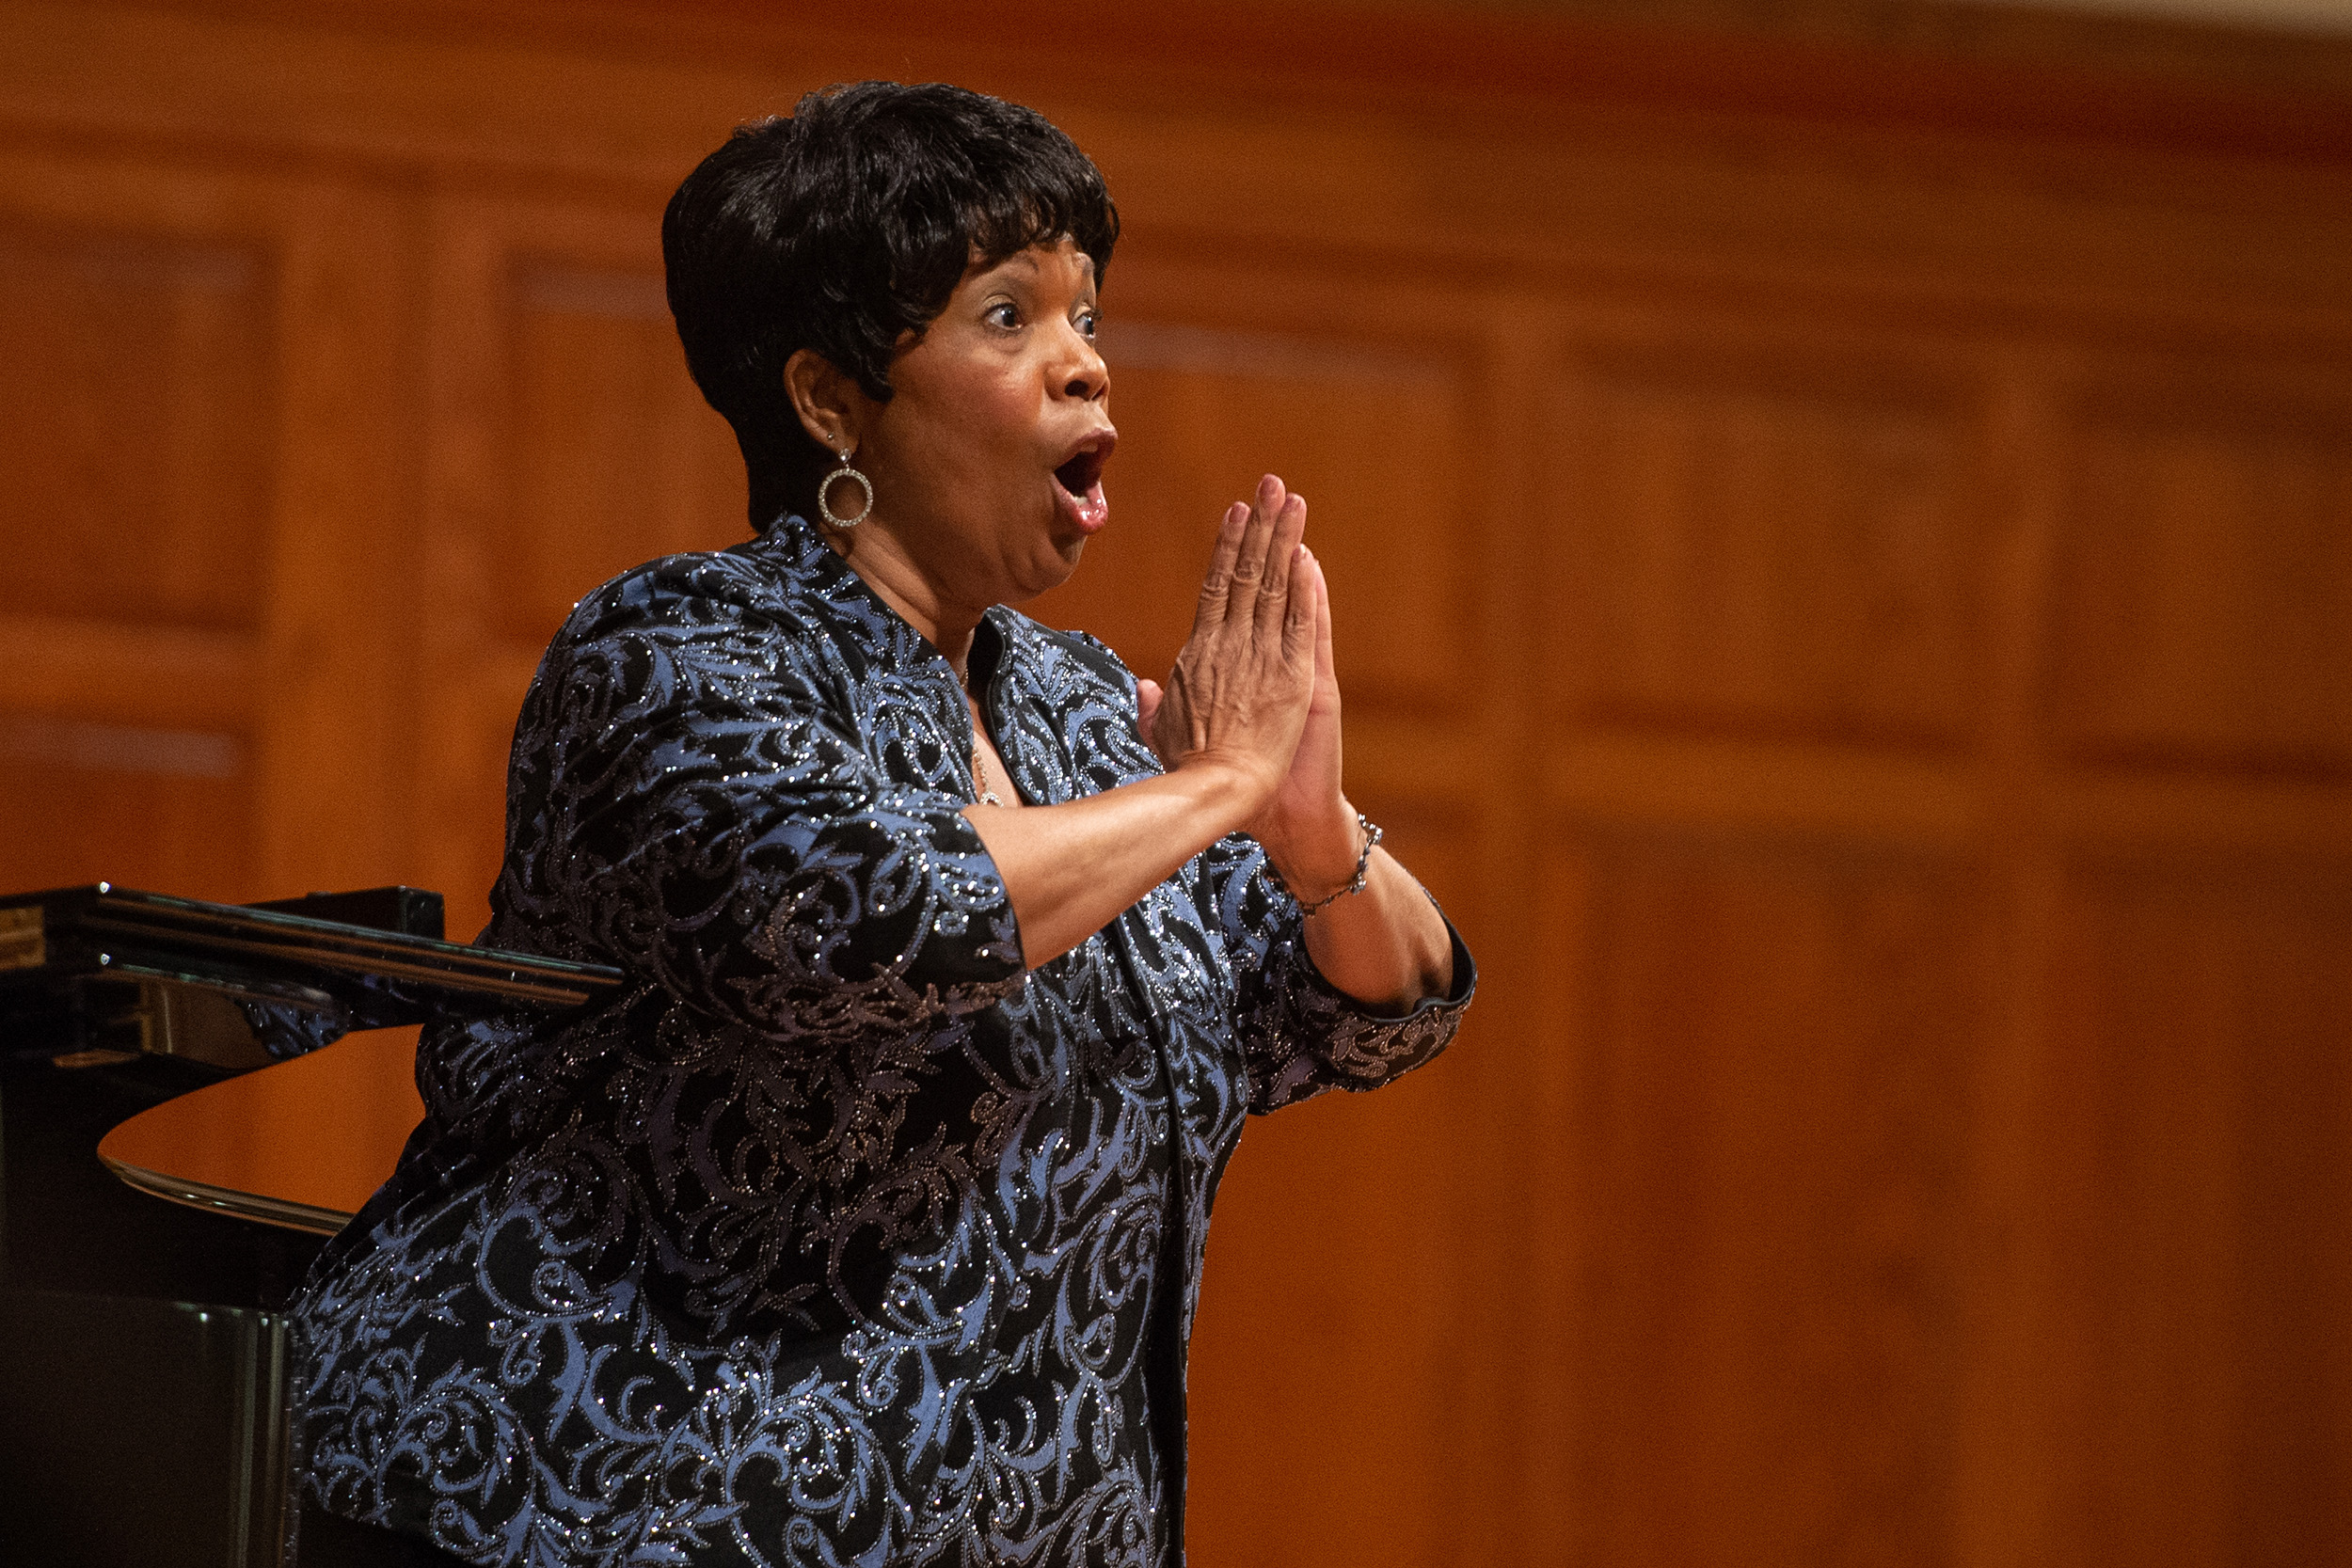 Songs by African American Composers performed by Dr. Carren Moham at Hesston College Homecoming 2022